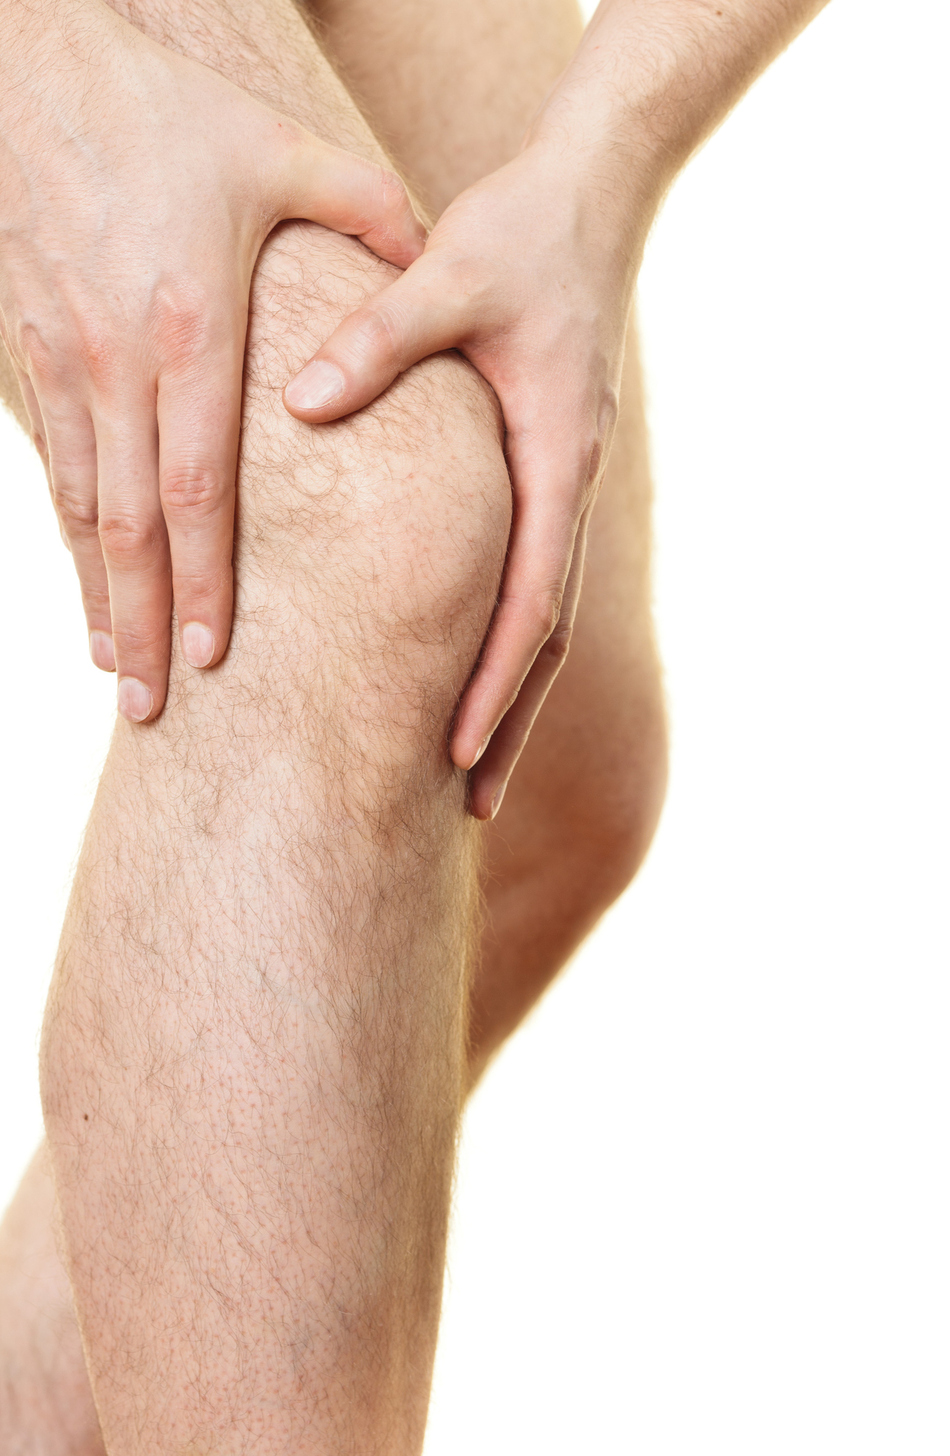 Listener Question: Should I Worry About My Popping Knee?